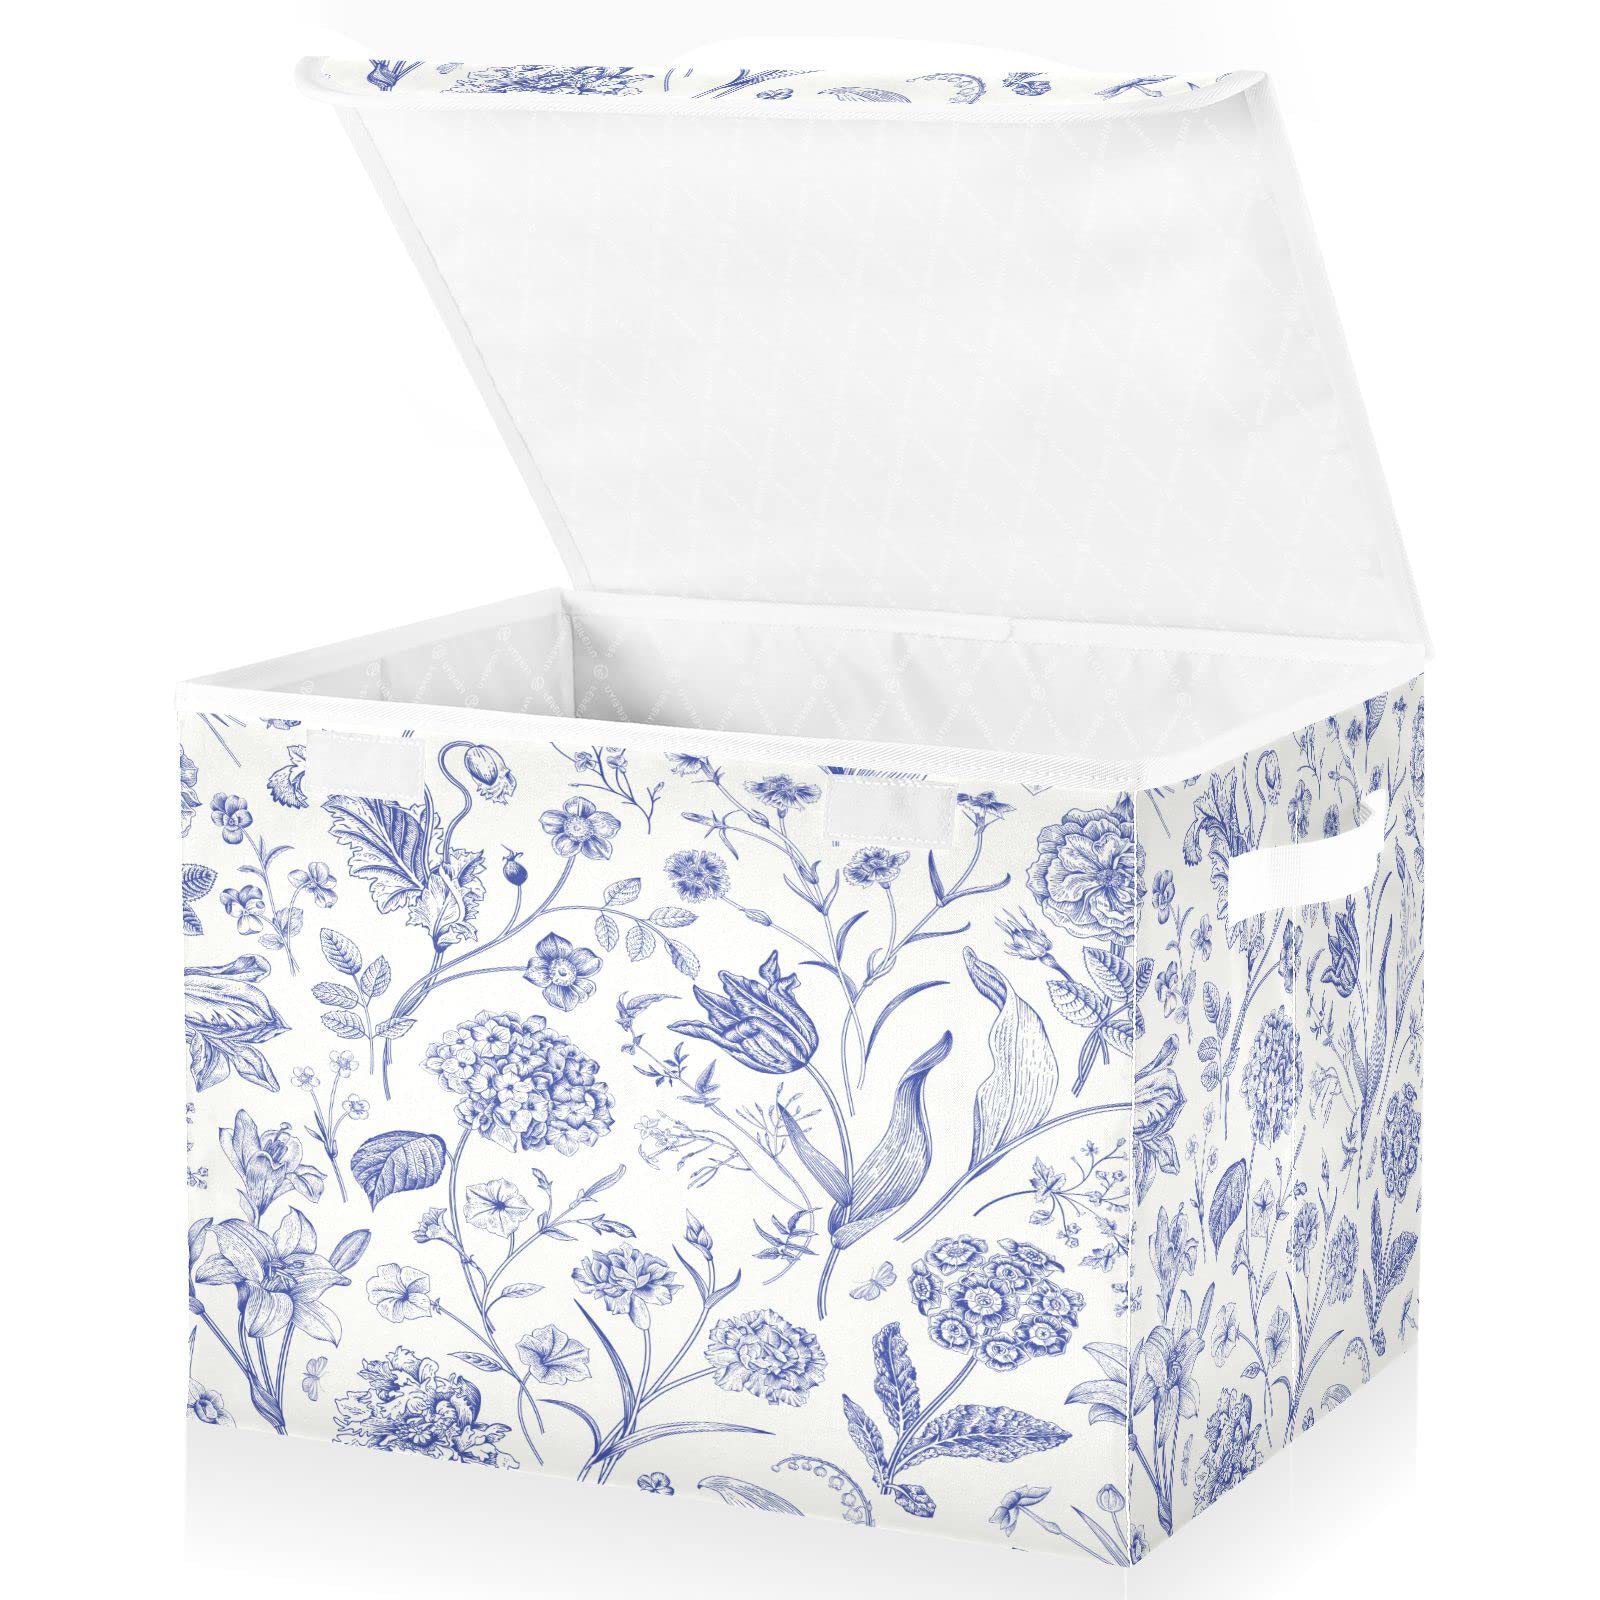 WELLDAY Toile Pattern Storage Baskets Foldable Cube Storage Bin with Lids and Handle, 16.5x12.6x11.8 In Storage Boxes for Toys, Shelves, Closet, Bedroom, Nursery